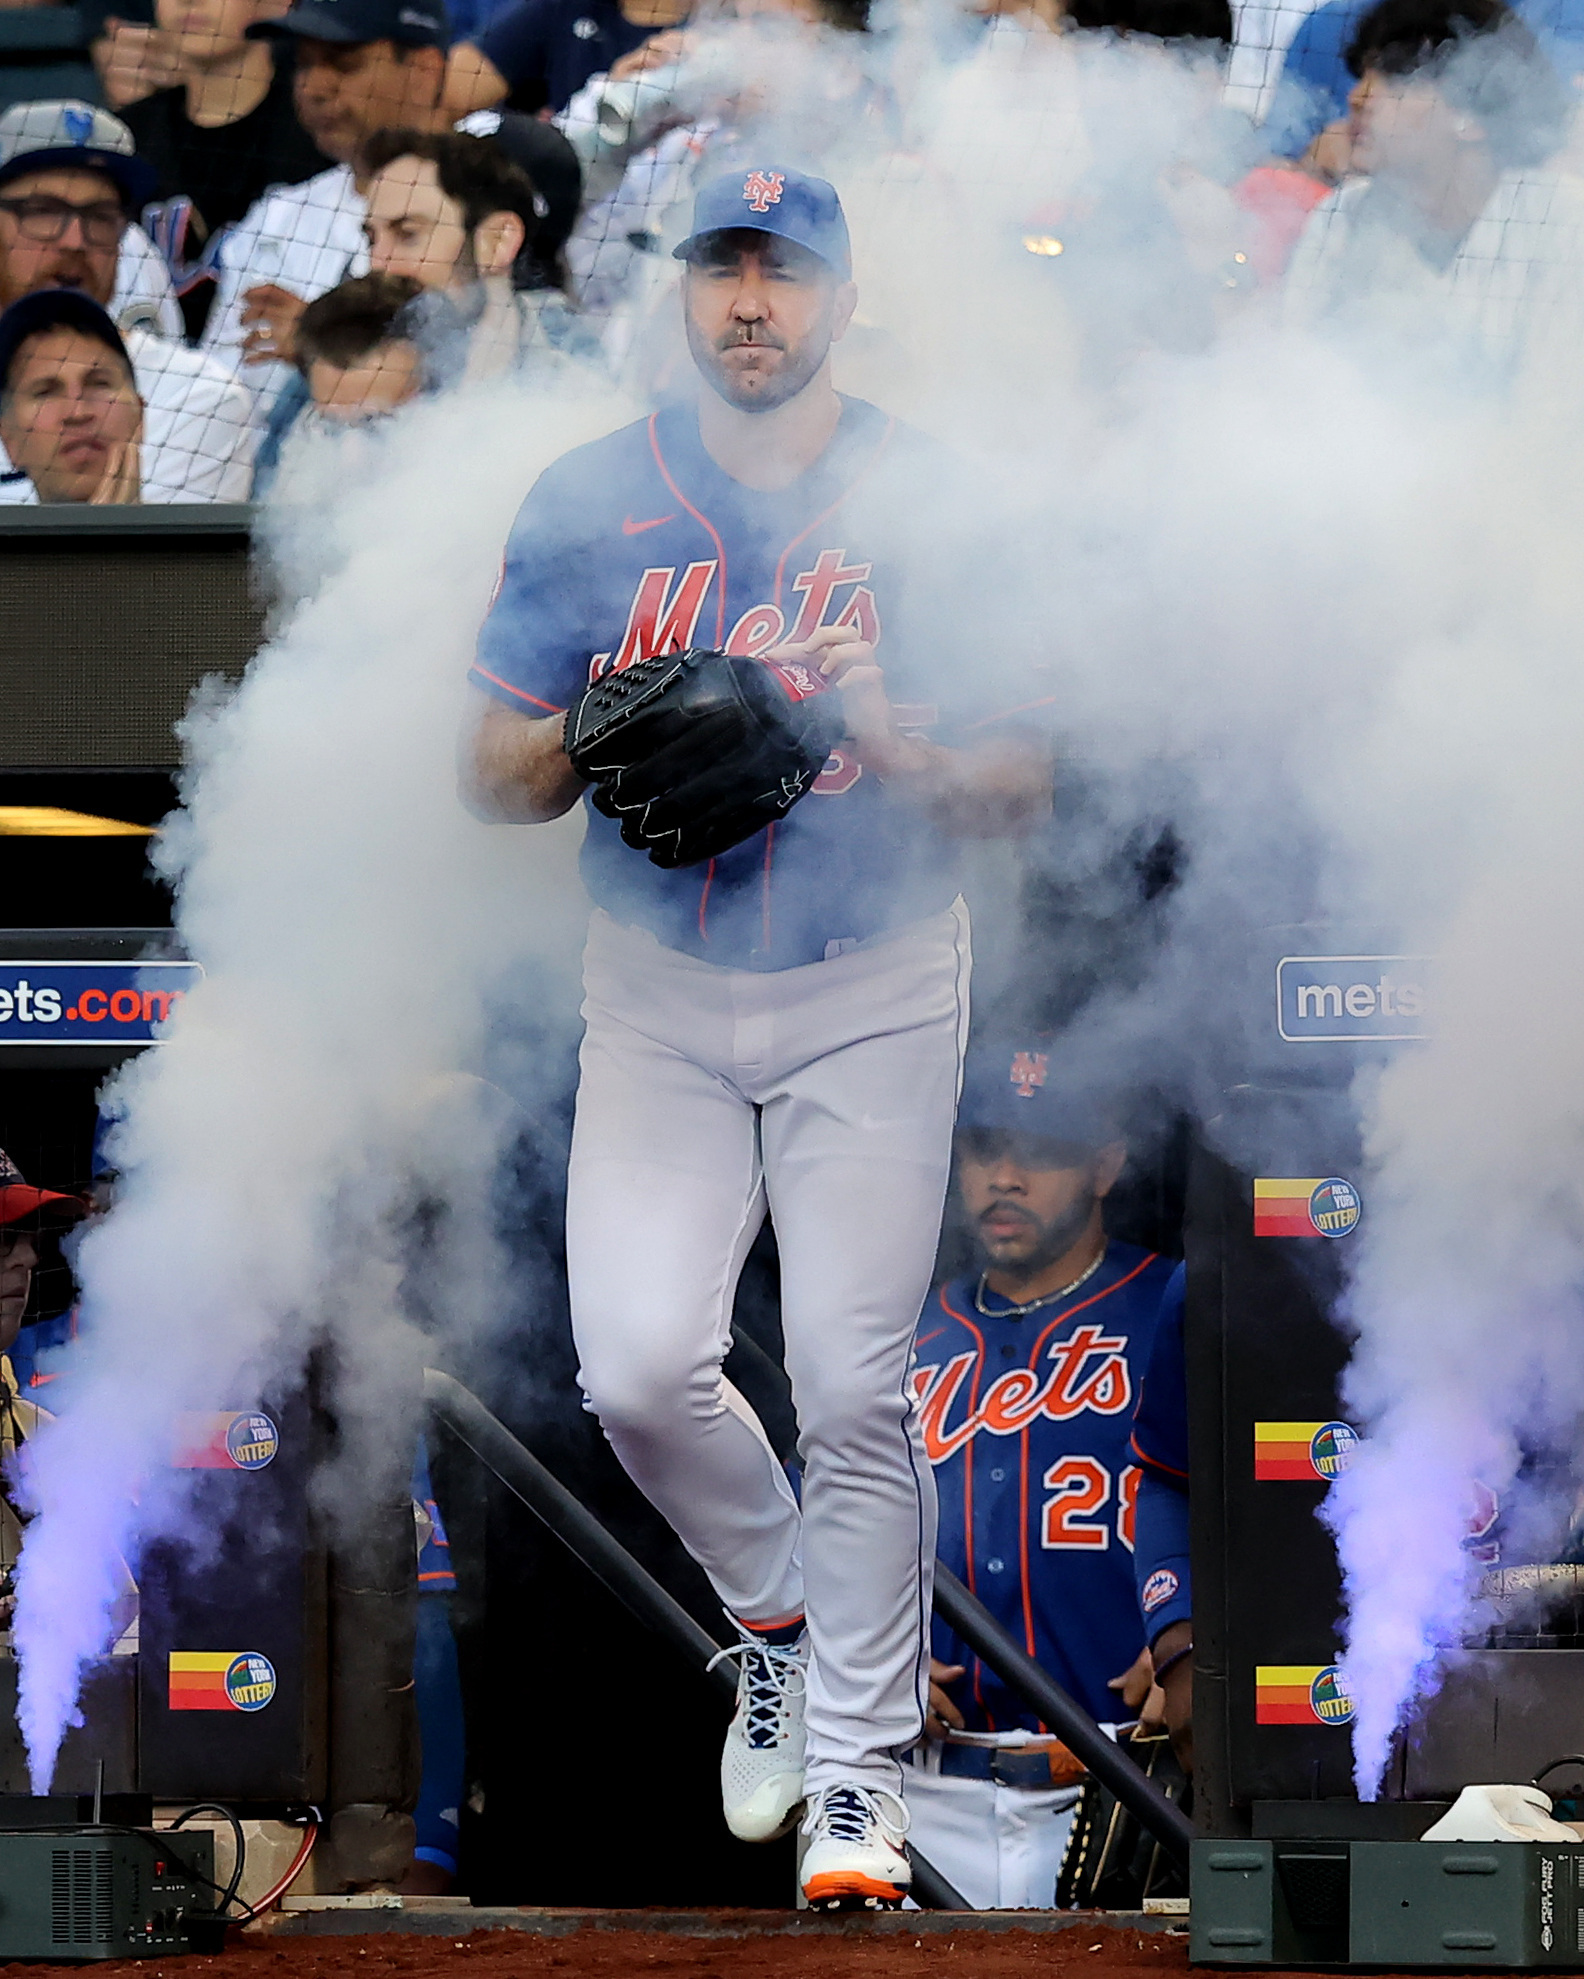 Fans rush Citi Field during Mets, Yankees game: Report 